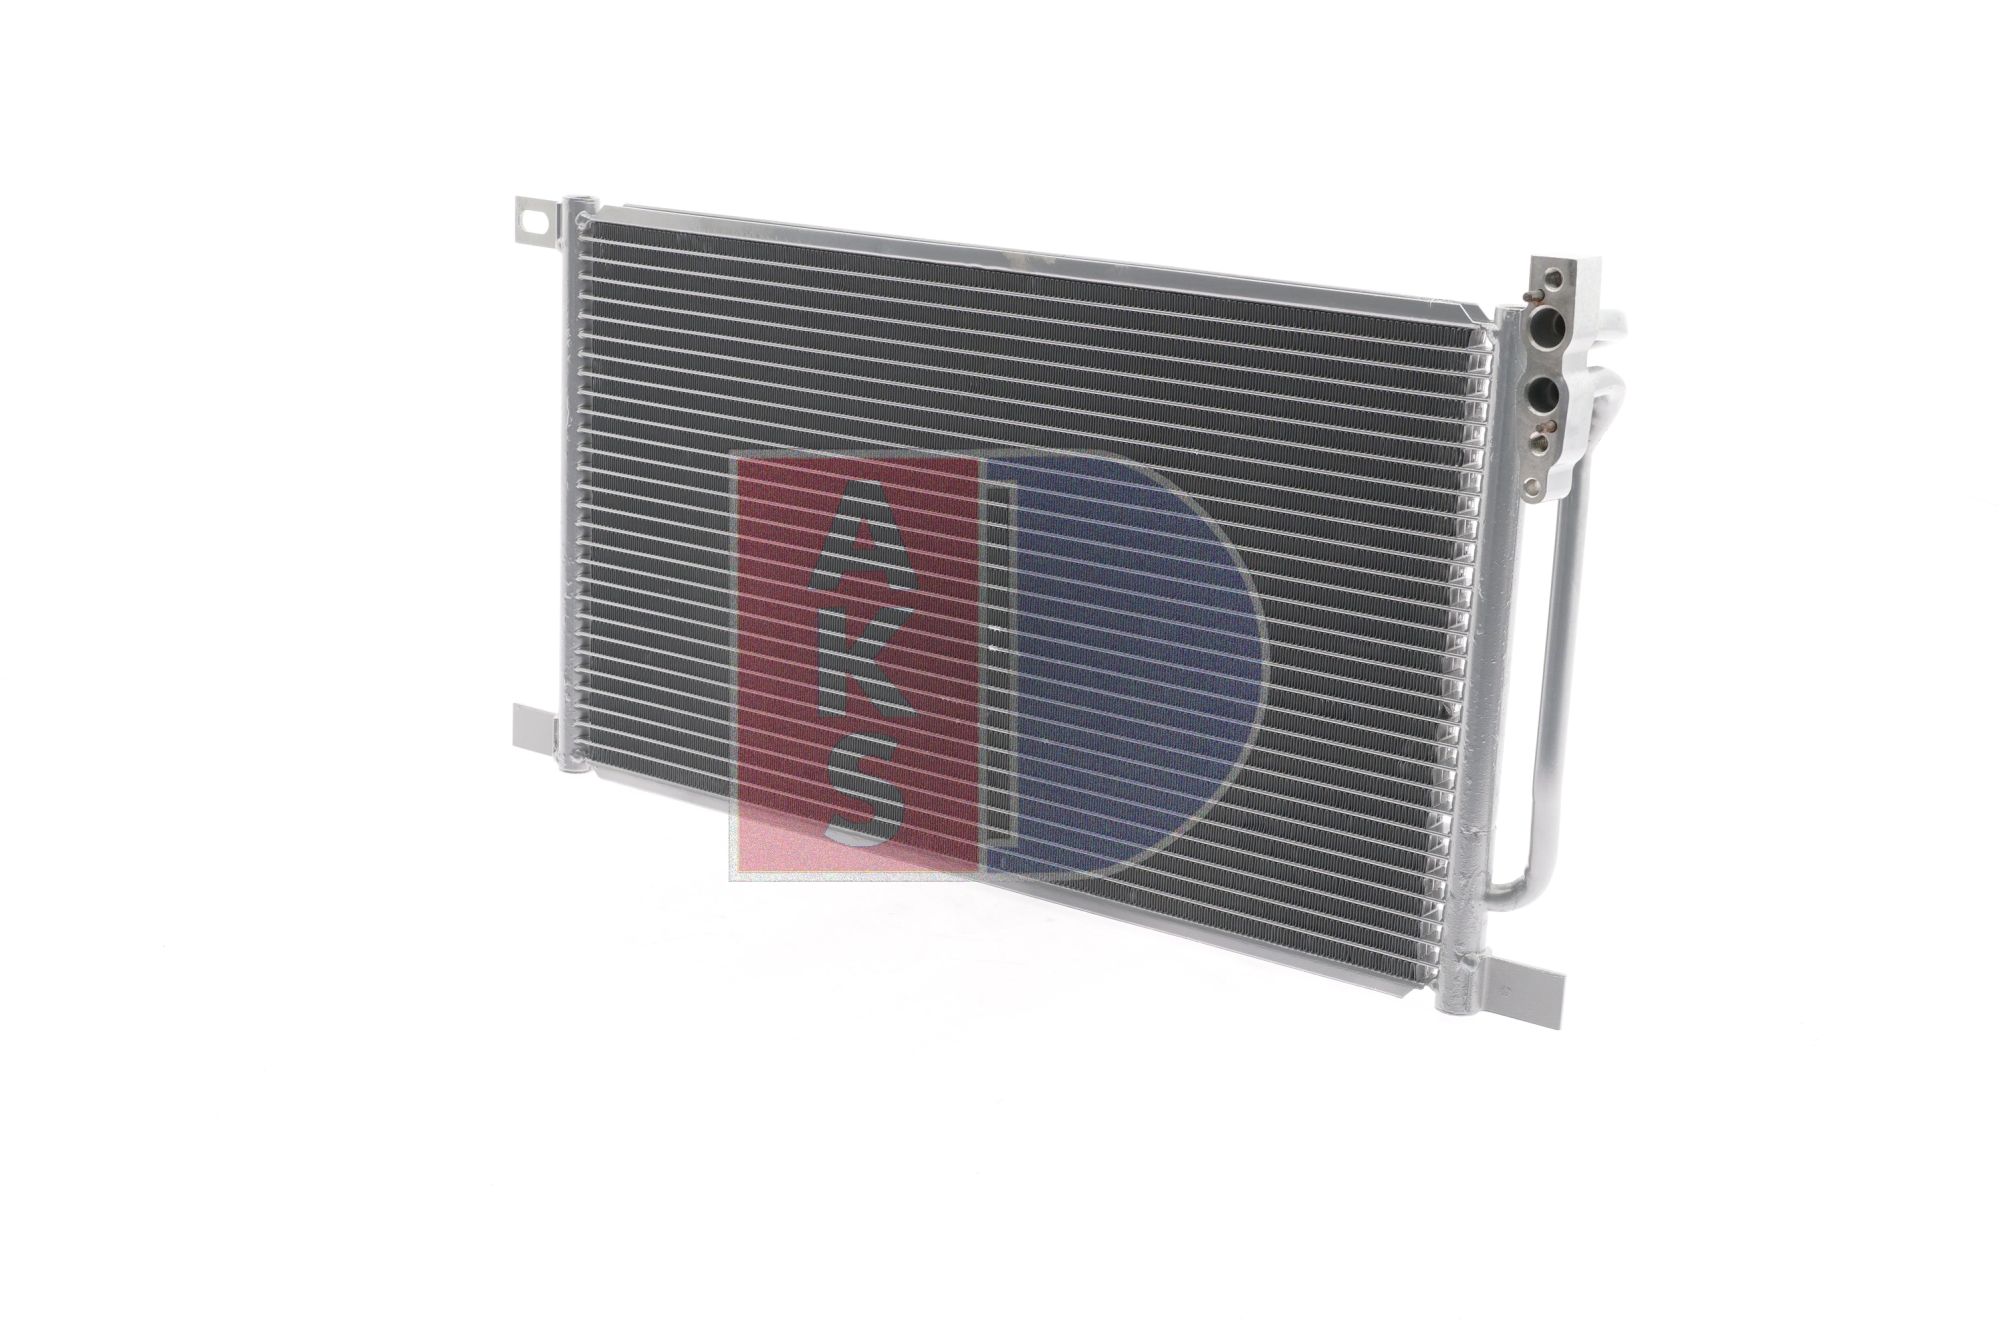 AKS DASIS 053330N Air conditioning condenser without dryer, 15,4mm, 13,8mm, 520mm